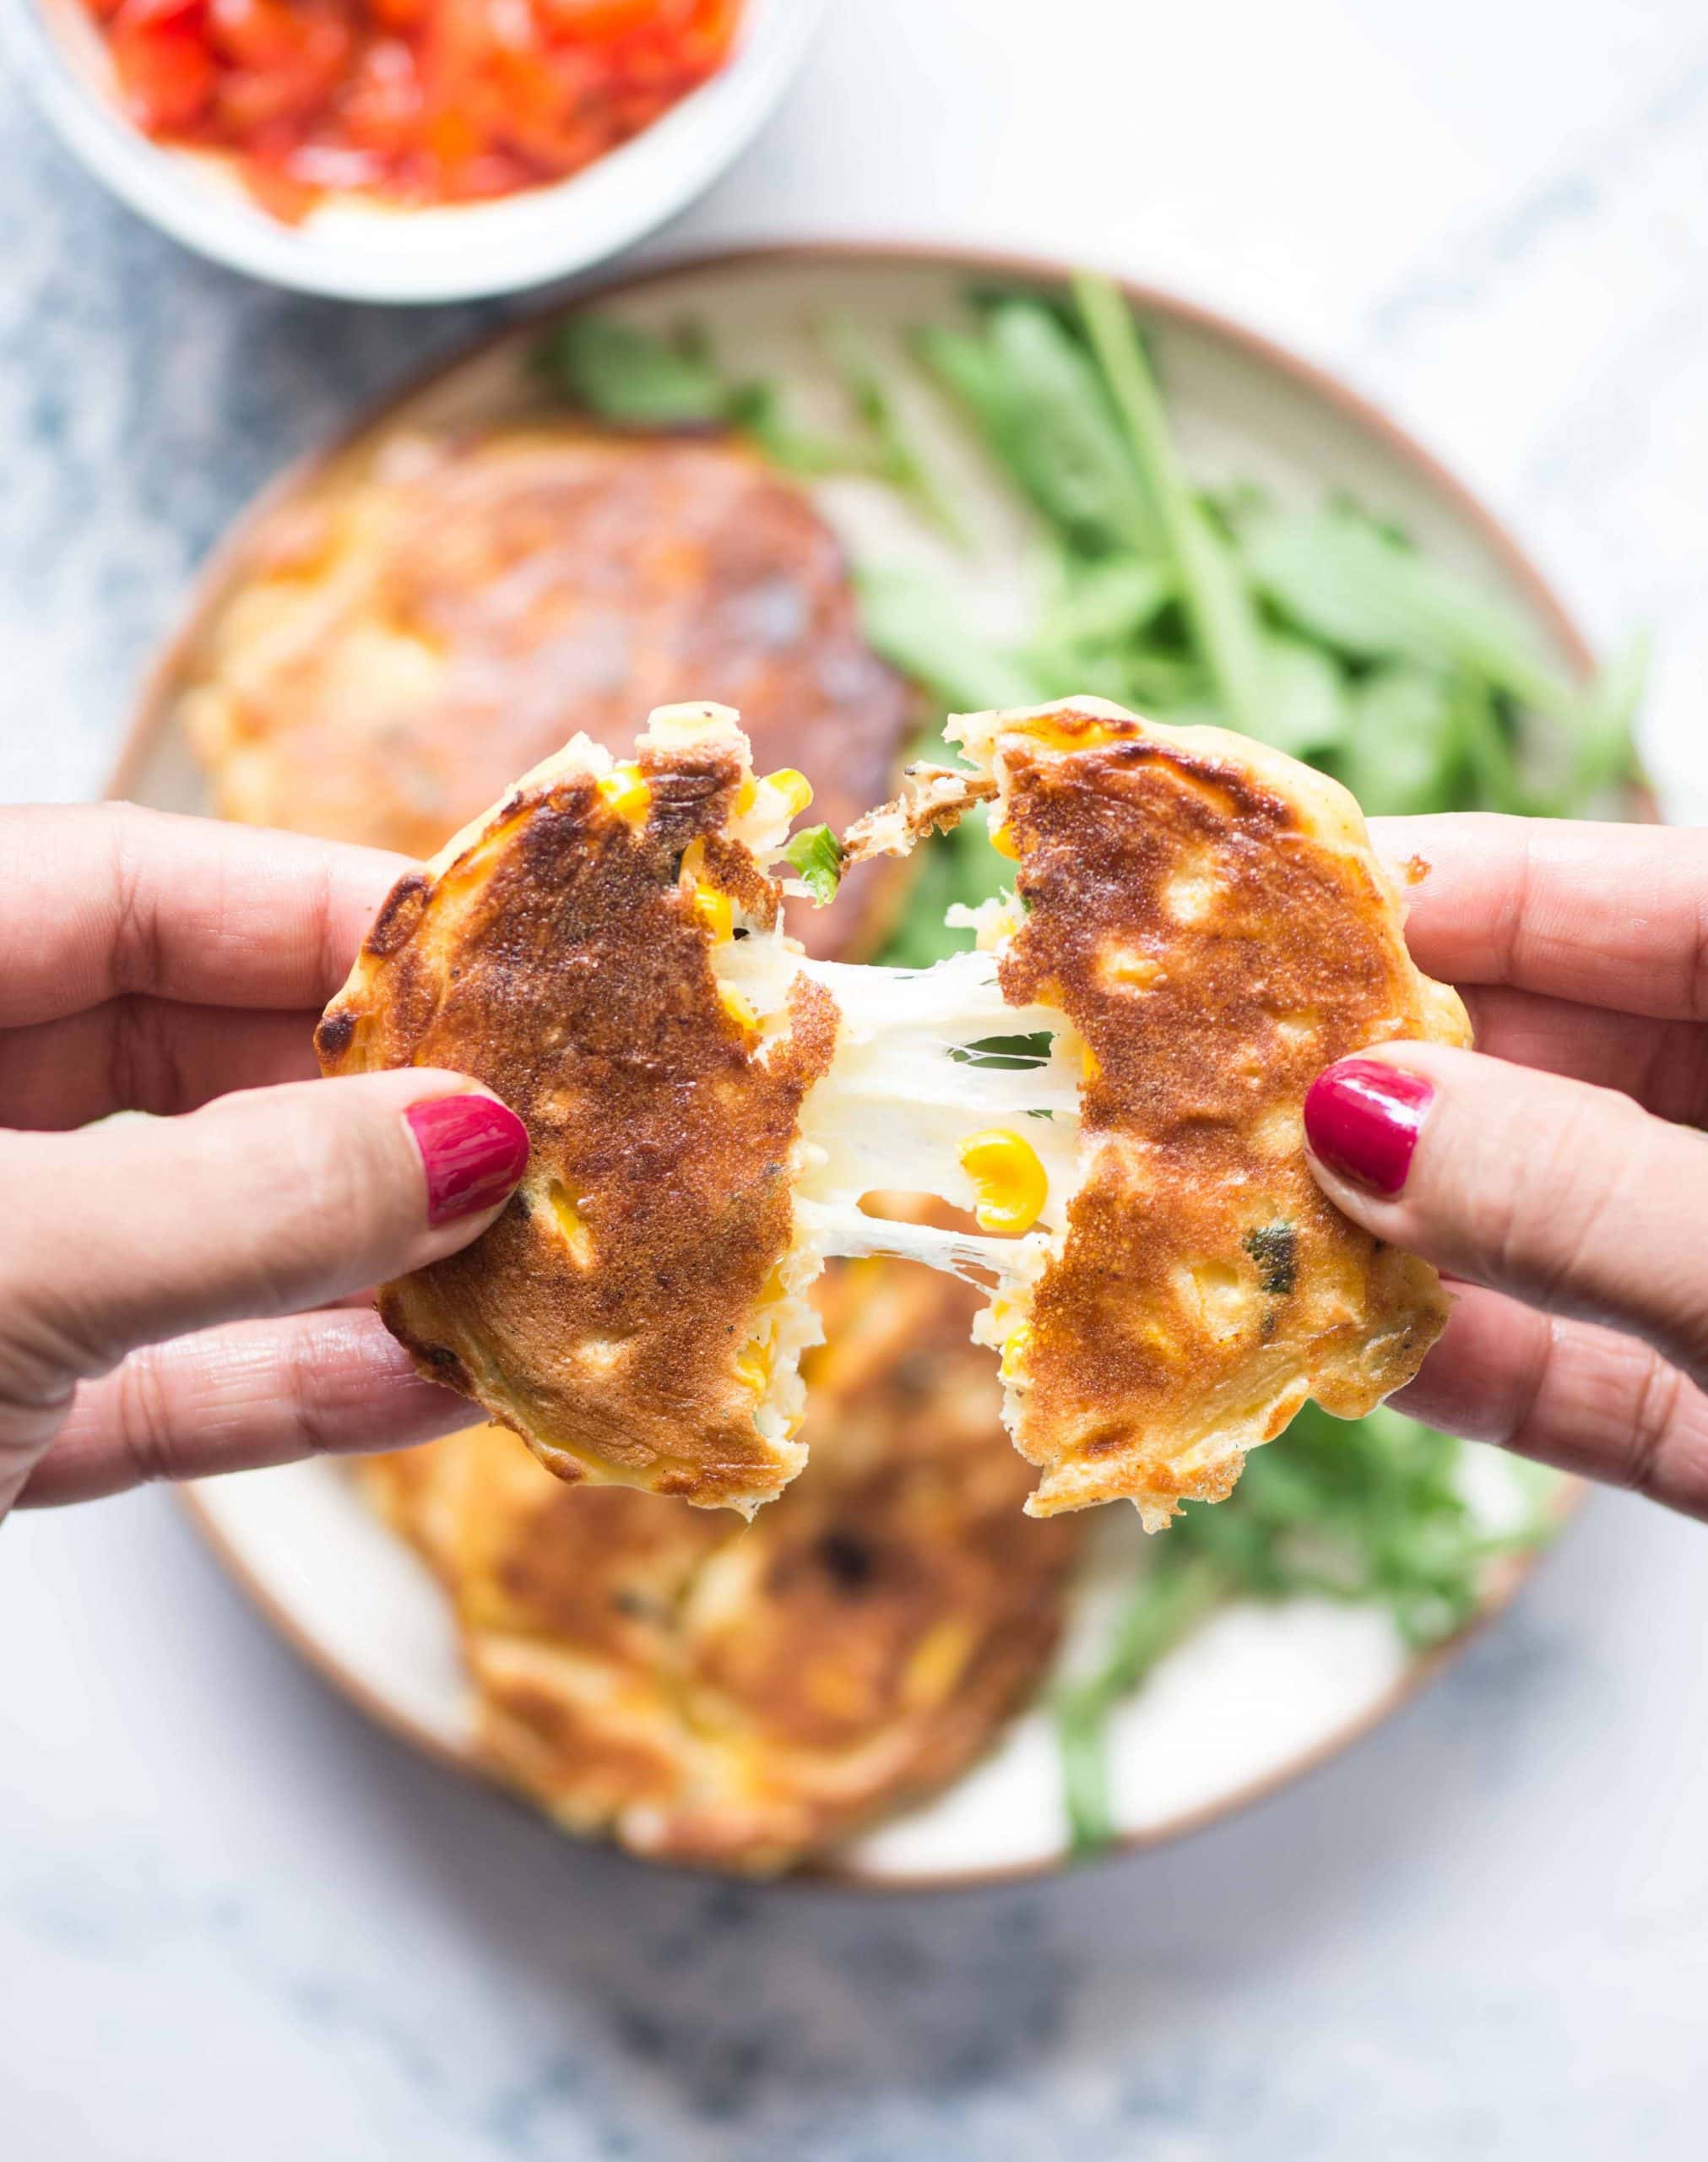 Corn fritters with gooey cheese in the middle